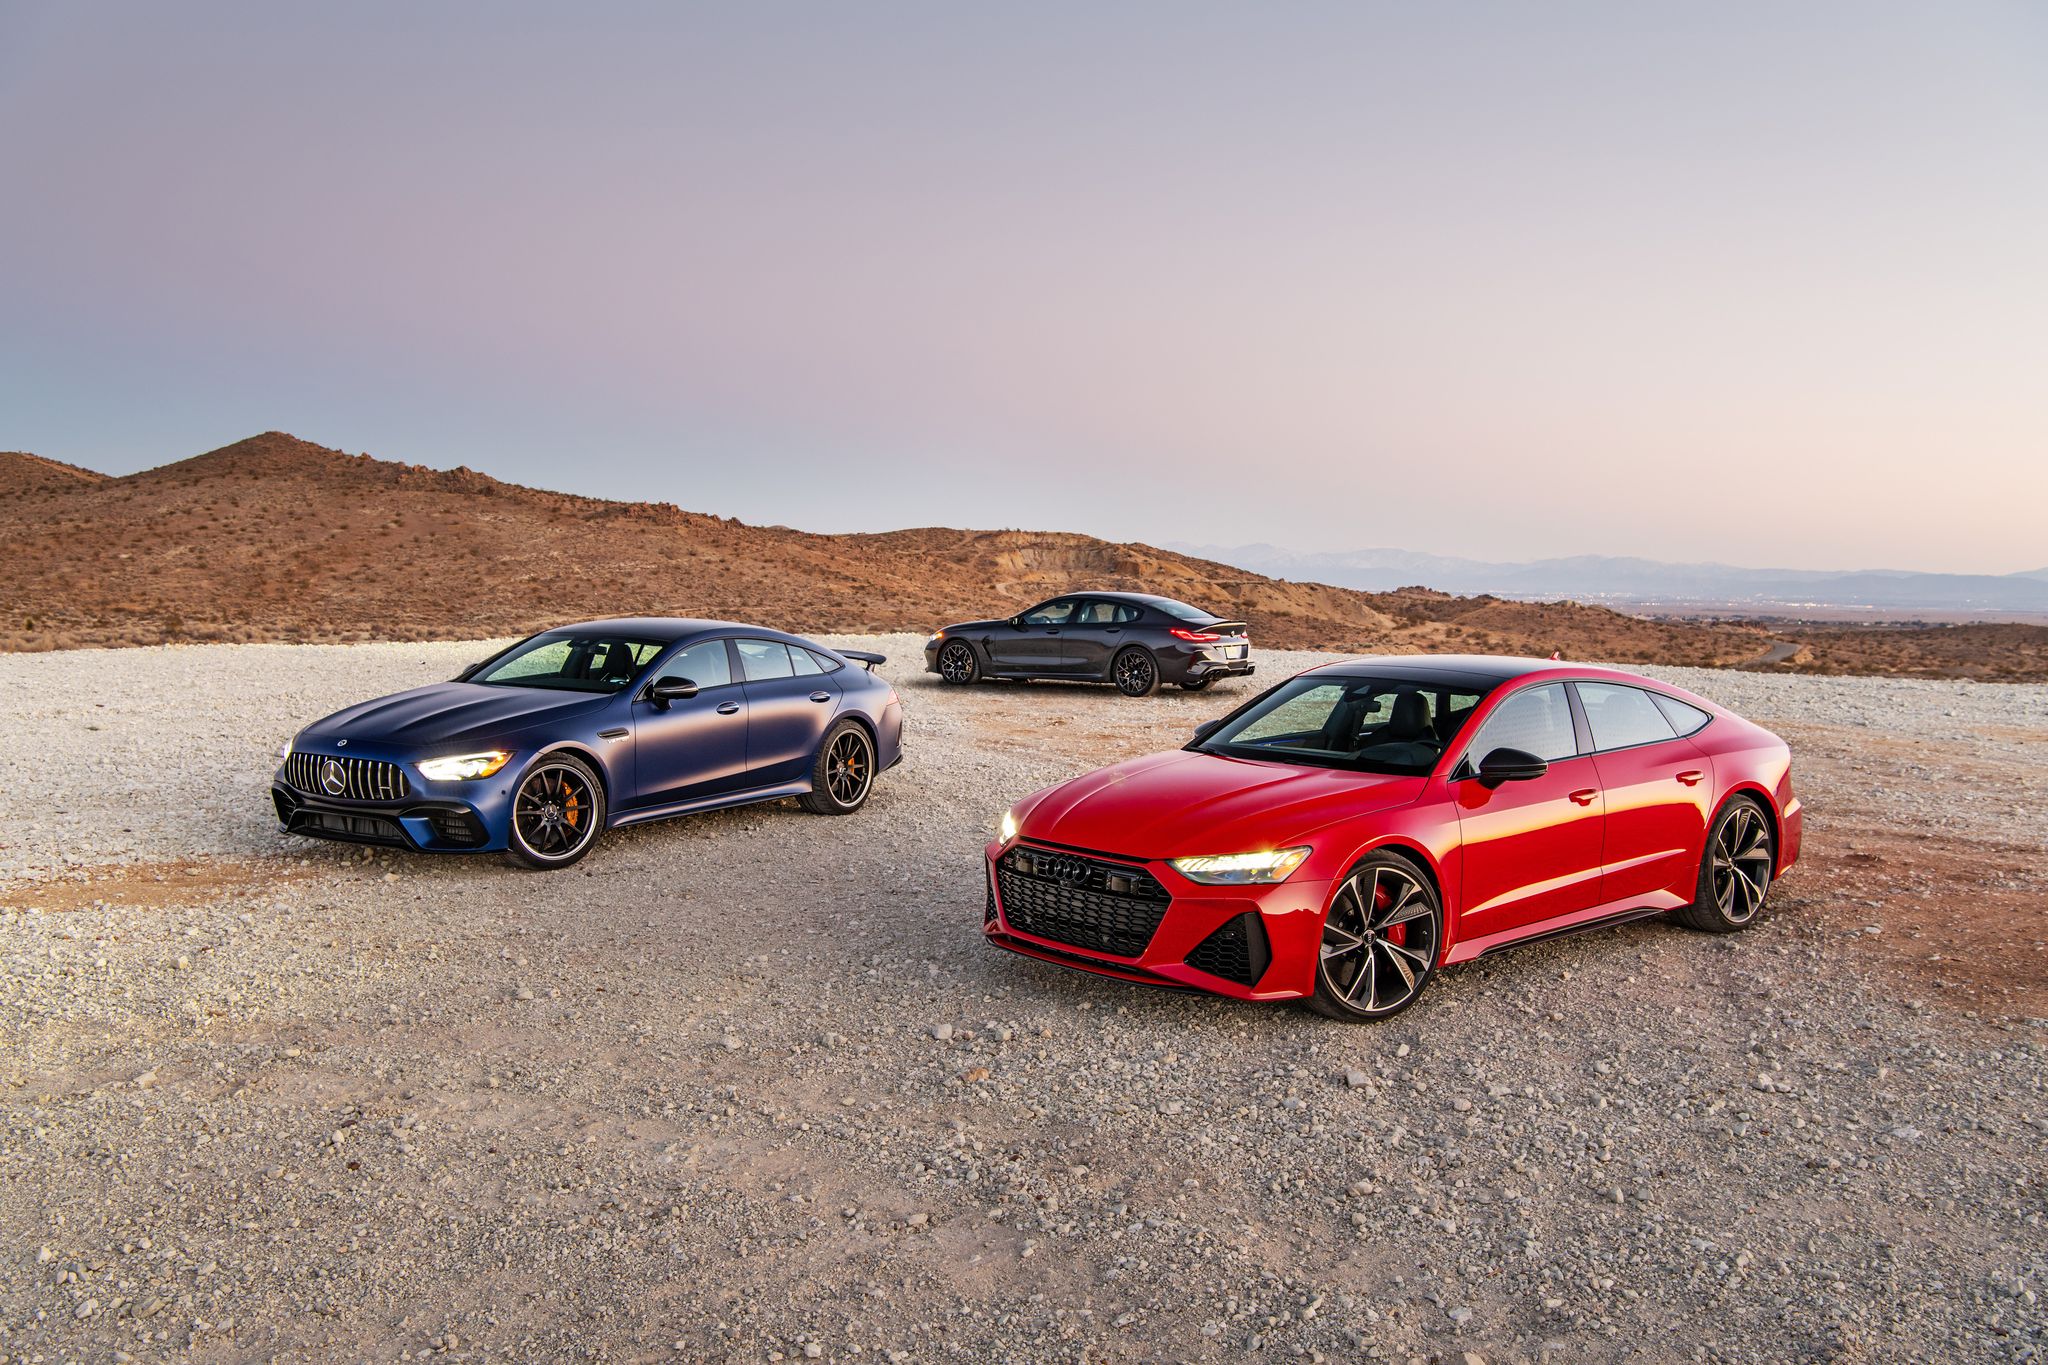 2021 mercedes amg gt63 s, ﻿2020 bmw m8 competition gran coupe, and ﻿2021 audi rs7 sportback